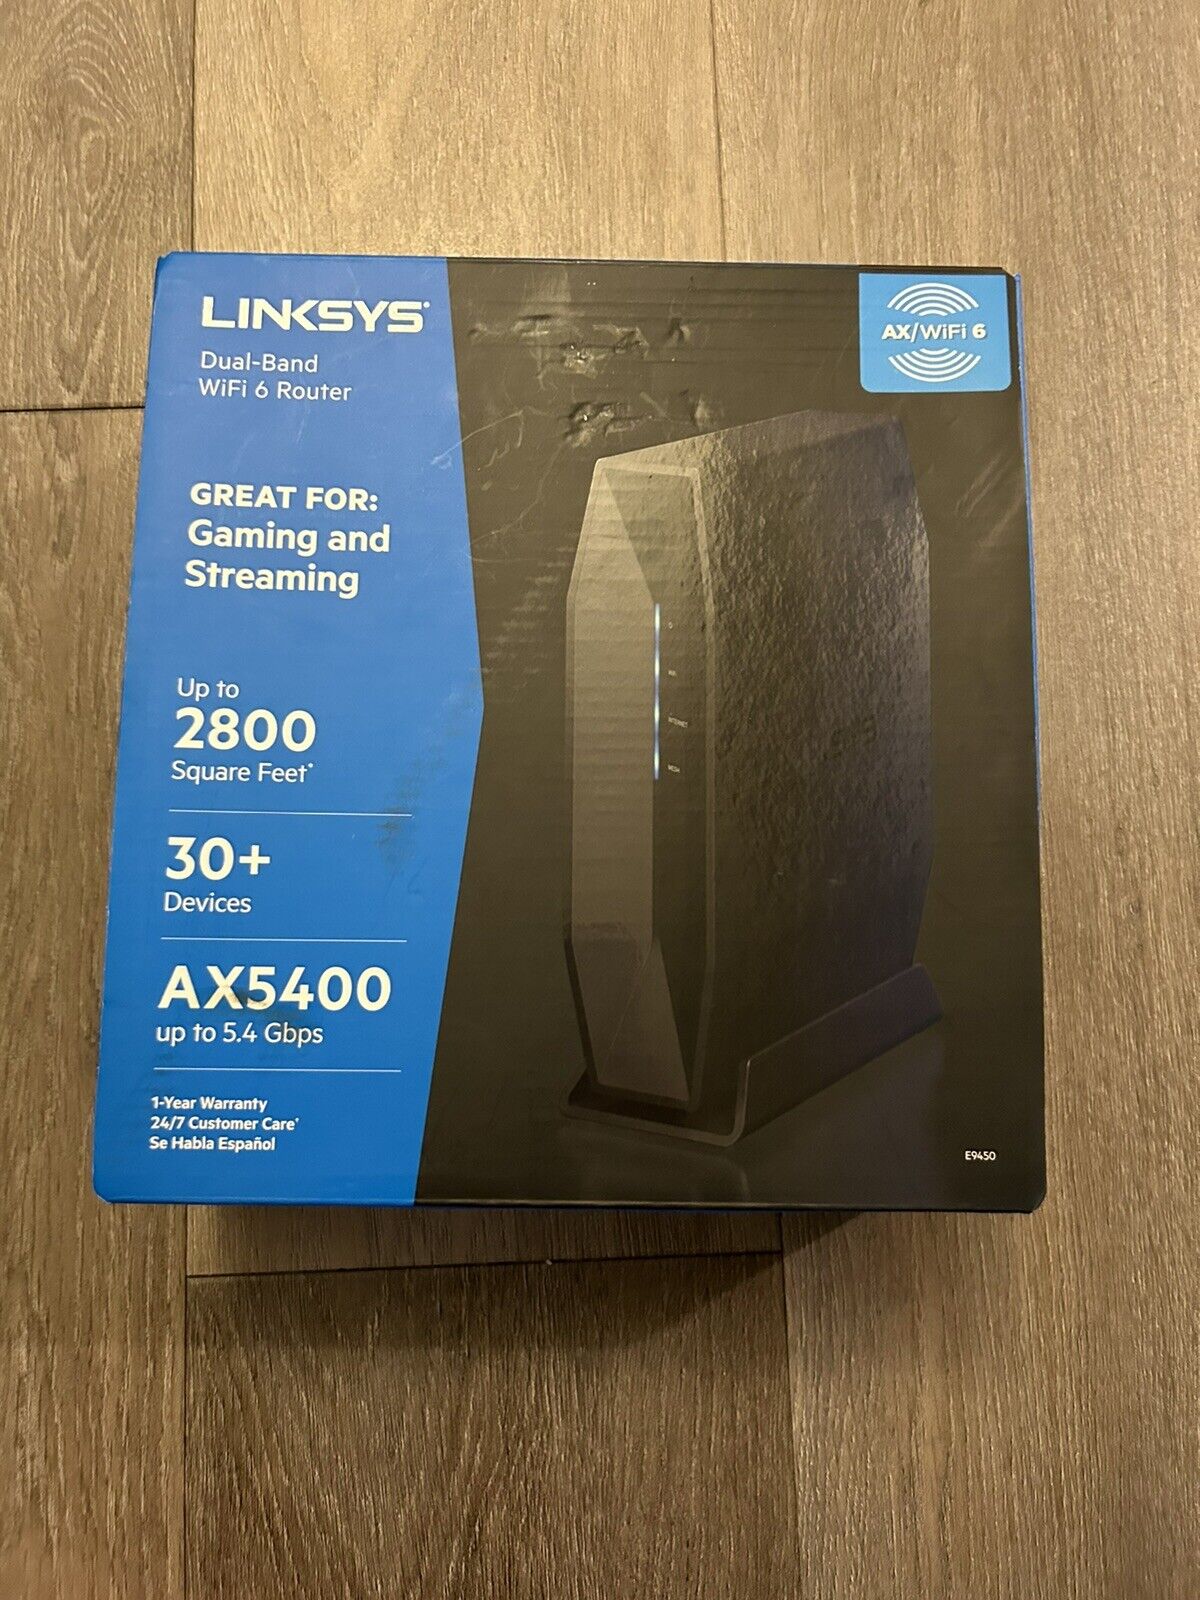 Open Box LINKSYS AX5400 DUALBAND WiFi 6 ROUTER With Original Packaging & Manuals